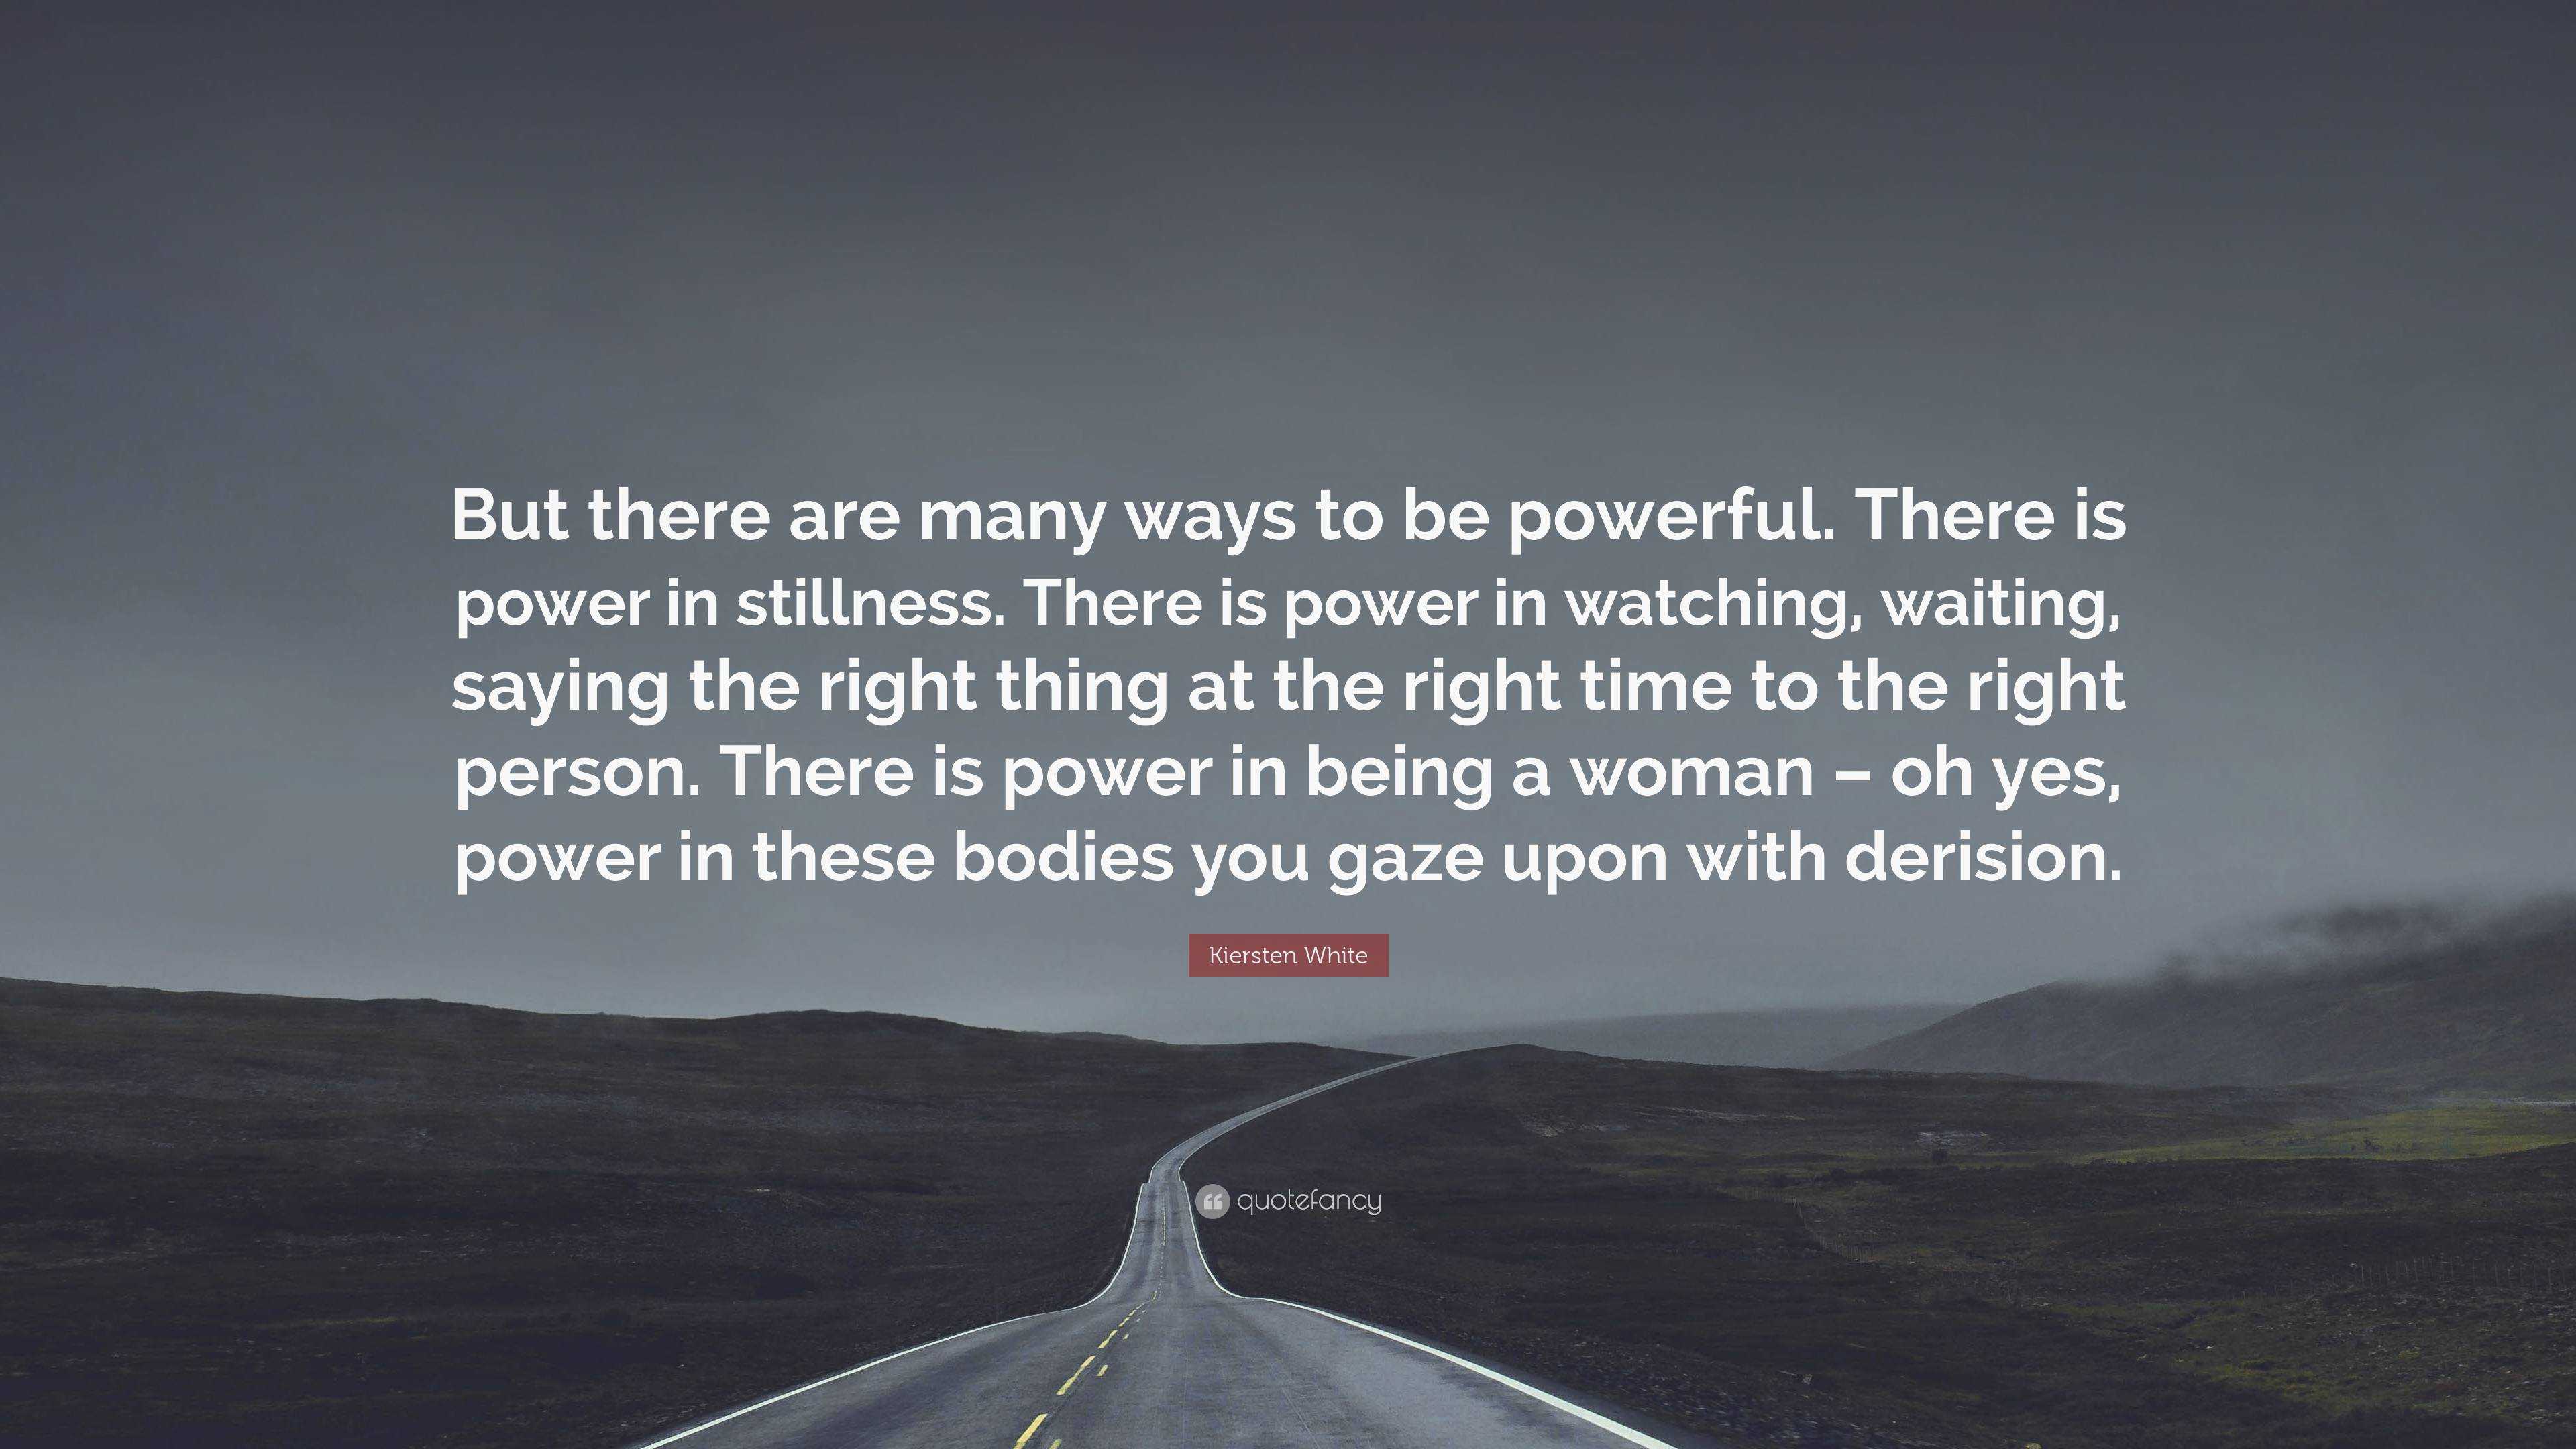 Kiersten White Quote: “But there are many ways to be powerful. There is ...